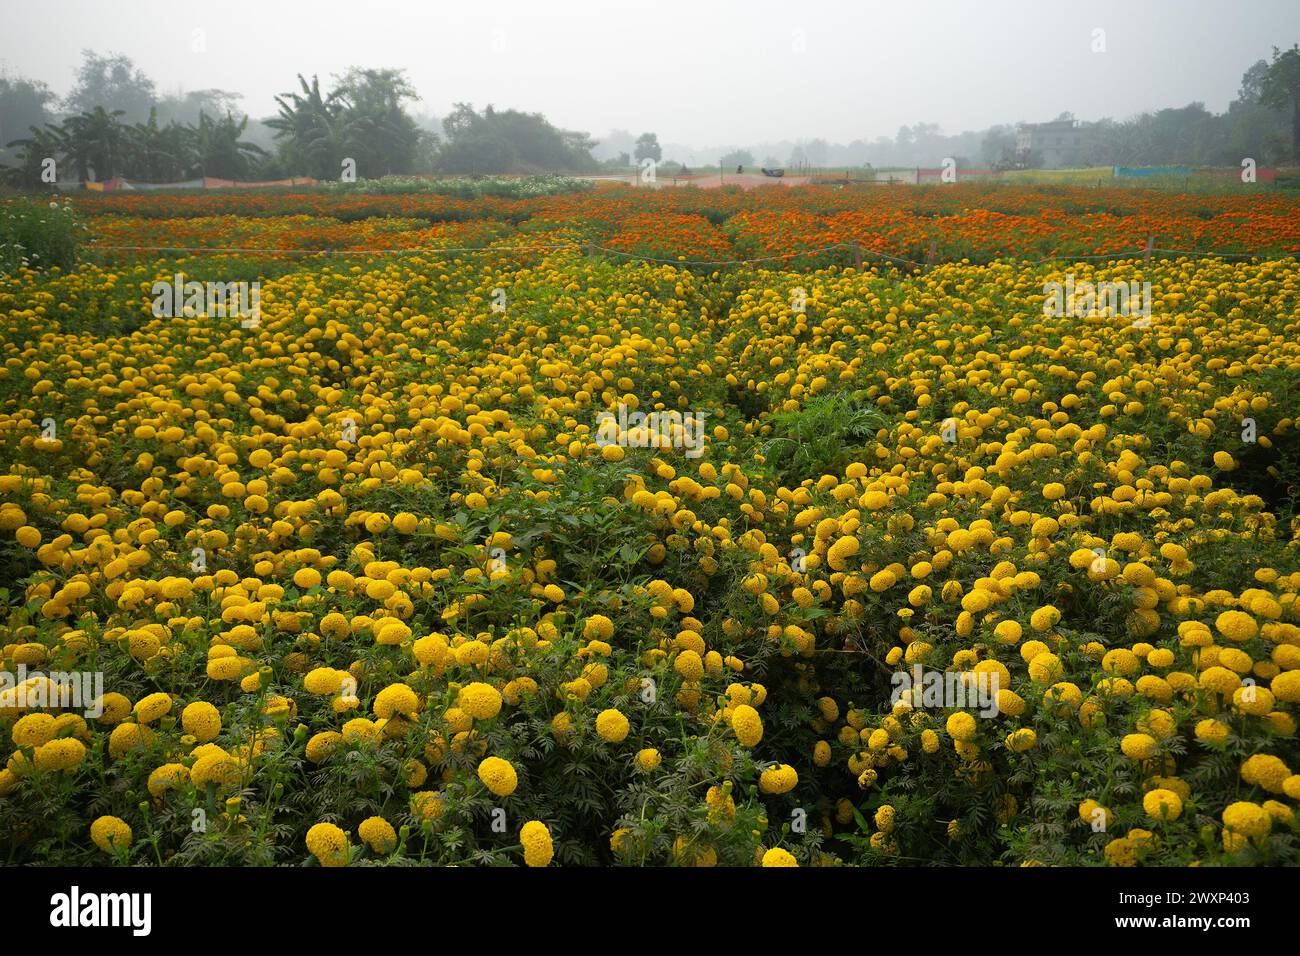 Vast field of yellow marigold flowers at valley of flowers, Khirai, West Bengal, India. Flowers are harvested here for sale. Tagetes, herbaceous plant Stock Photo